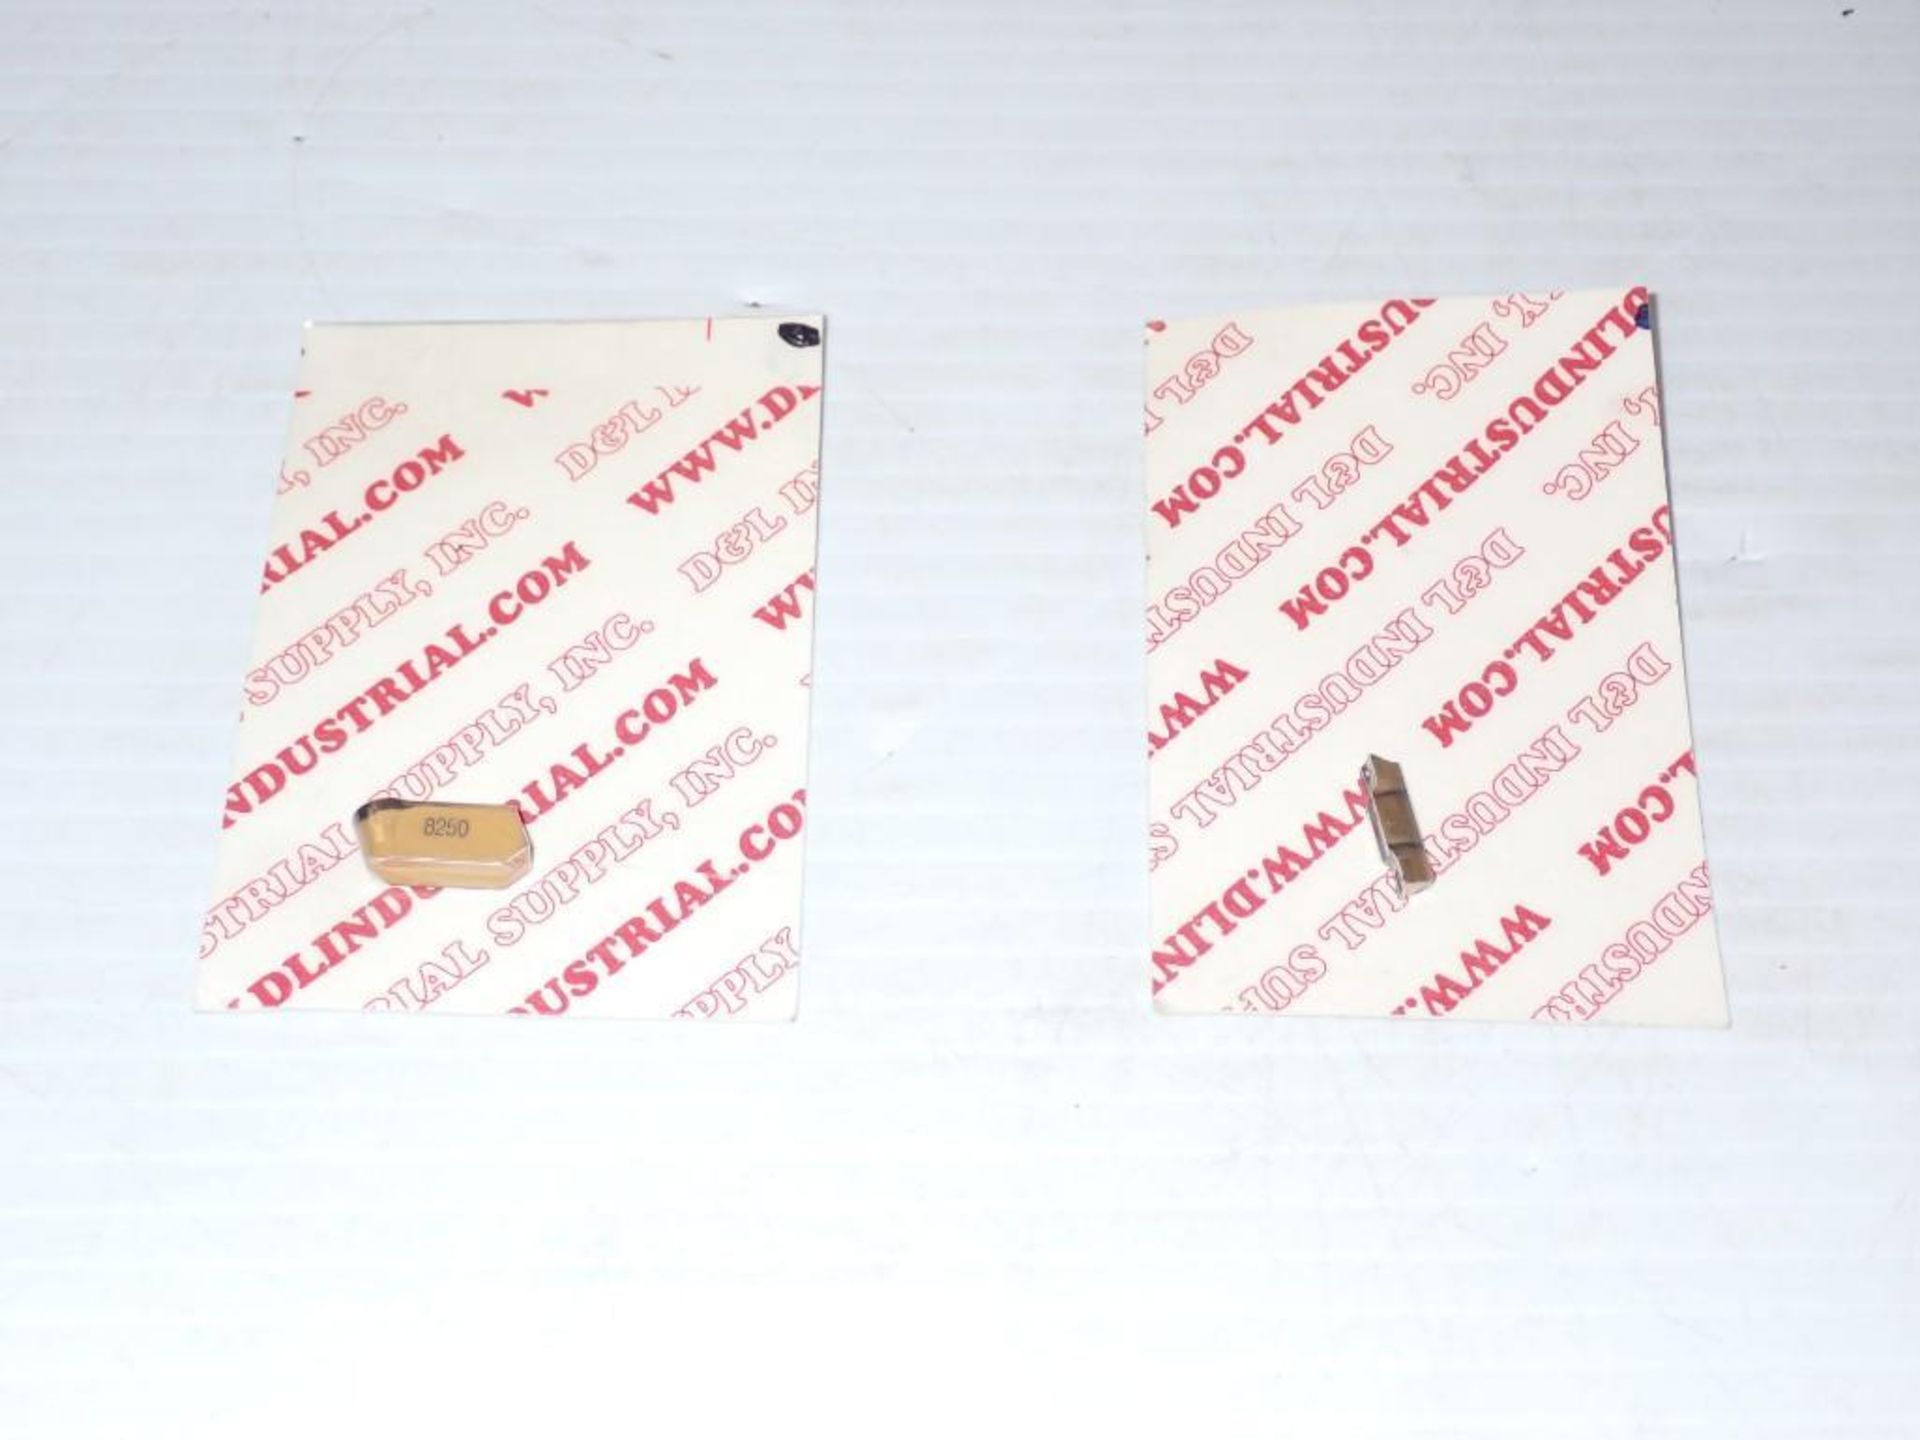 Lot of DLindustrial Carbide Inserts - Image 10 of 10